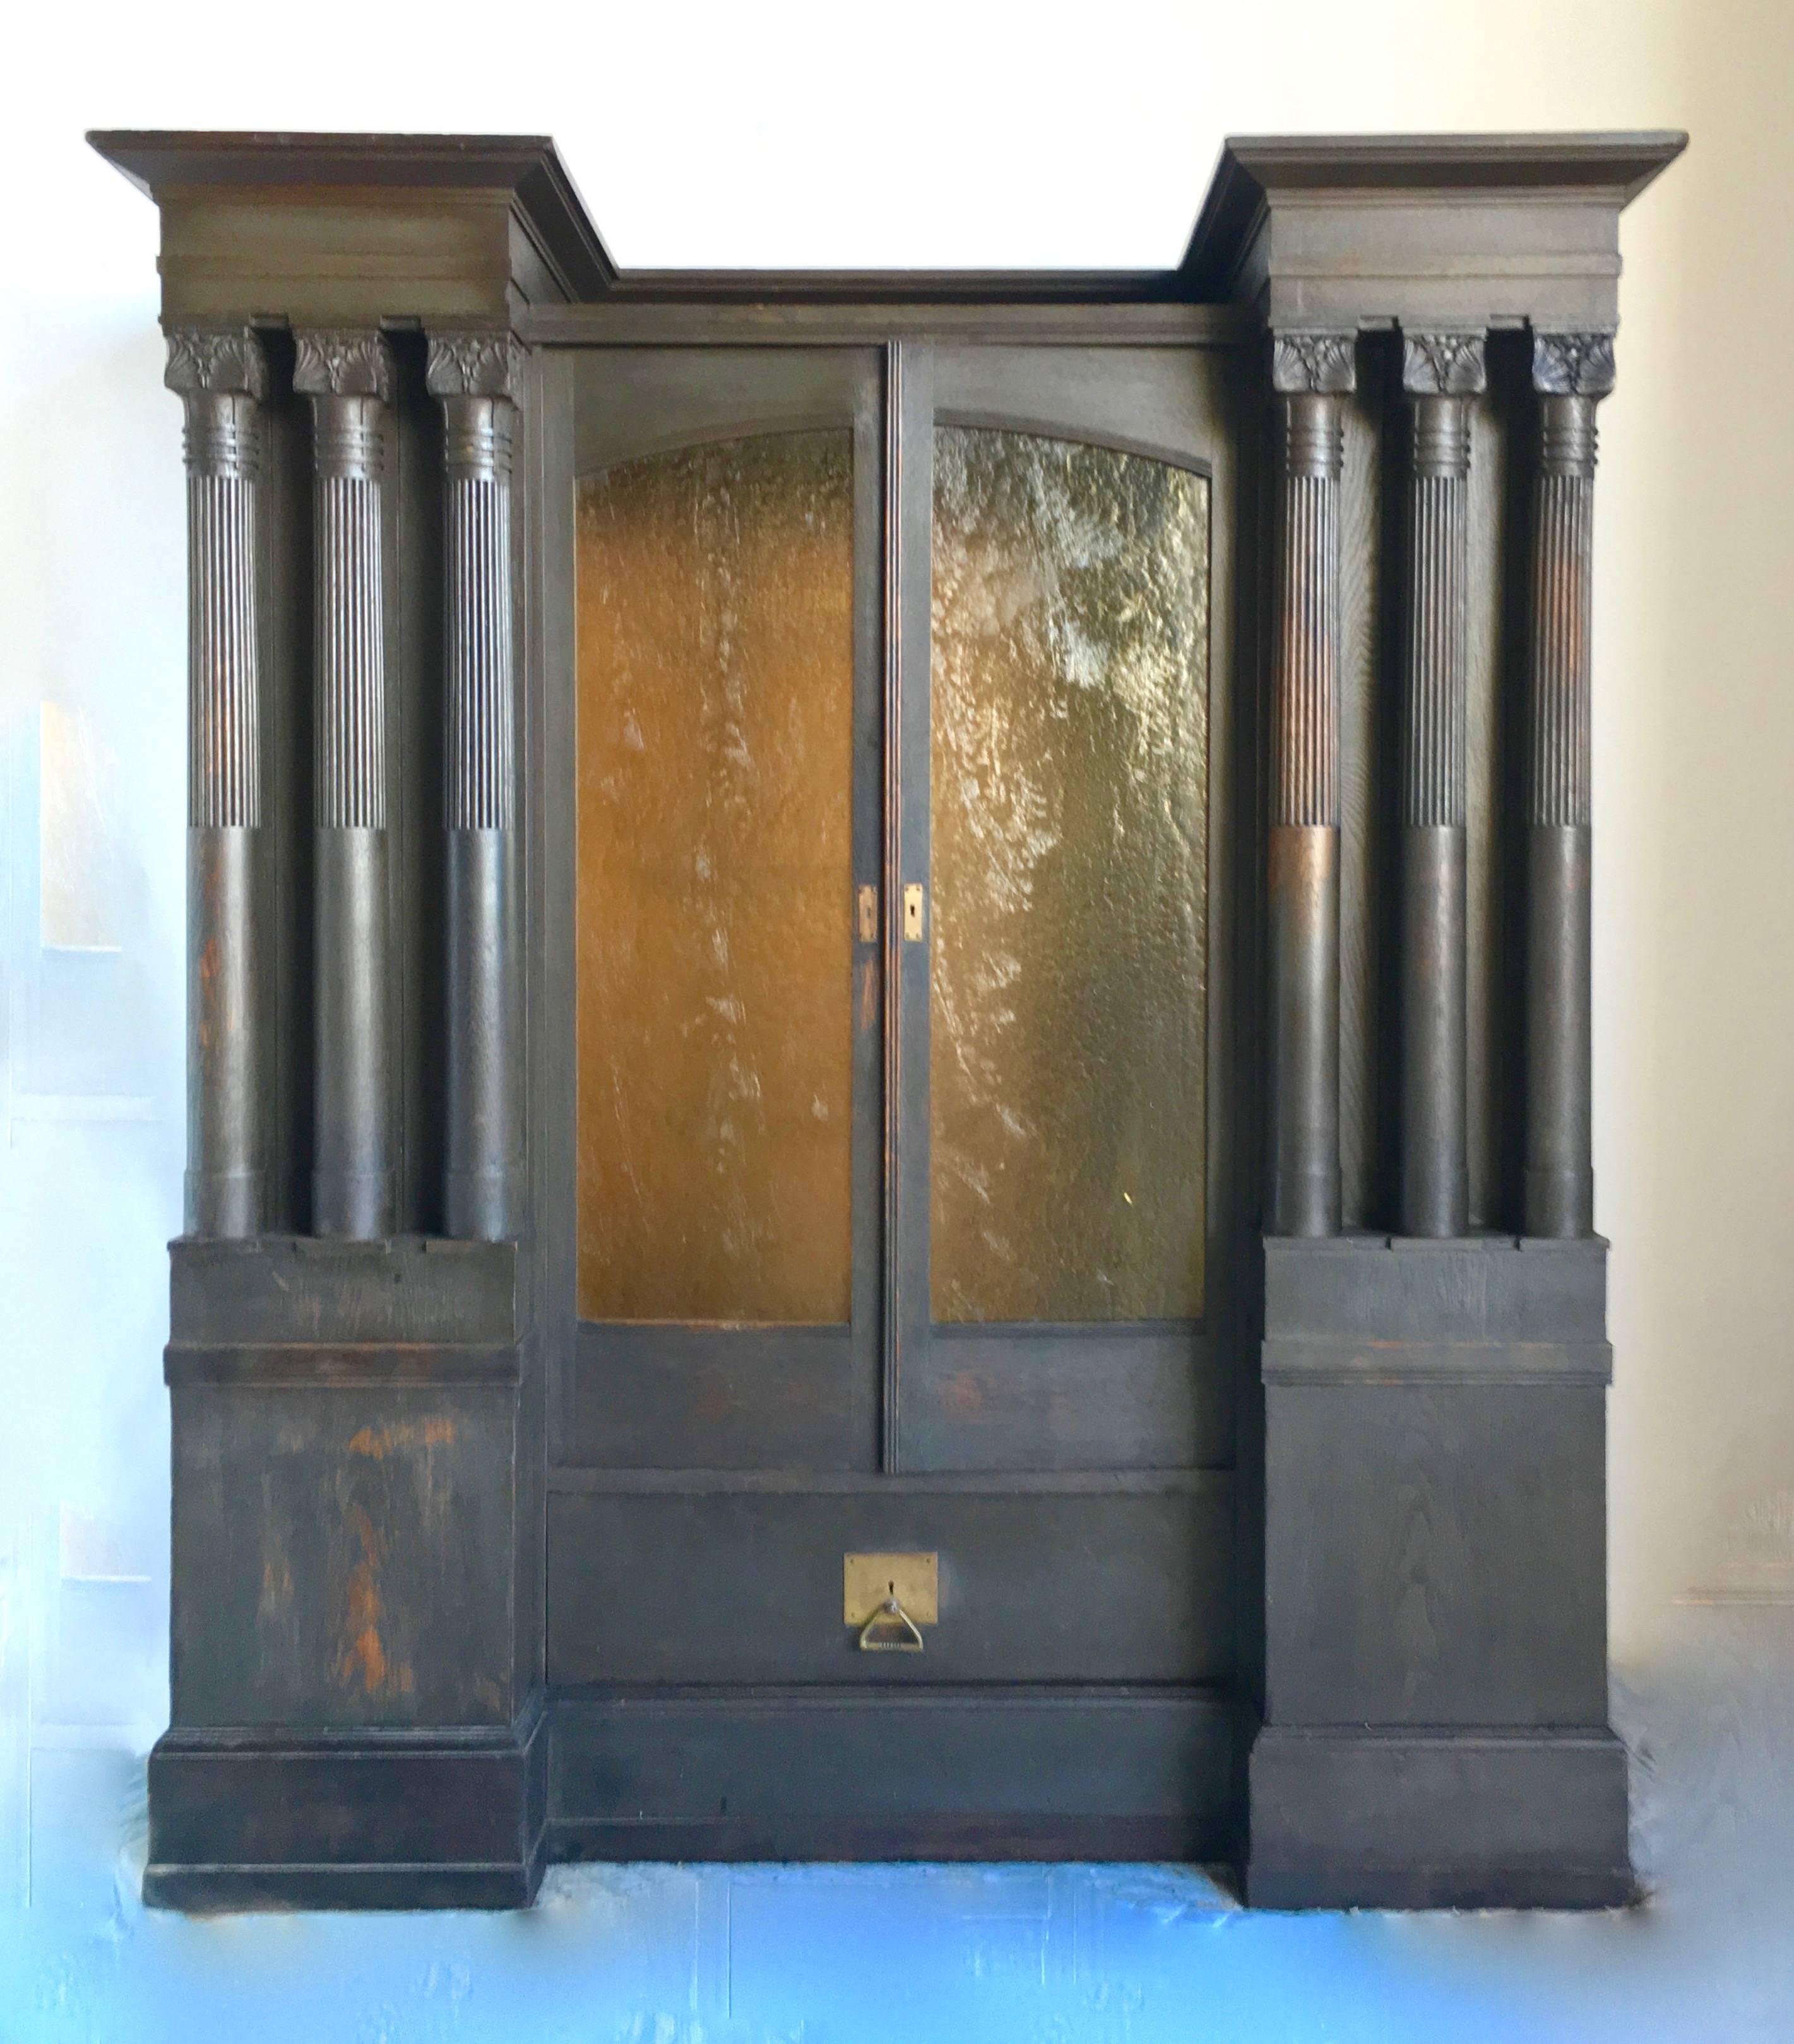 Jugendstil Library Cabinet In Good Condition For Sale In Treasure Island, CA